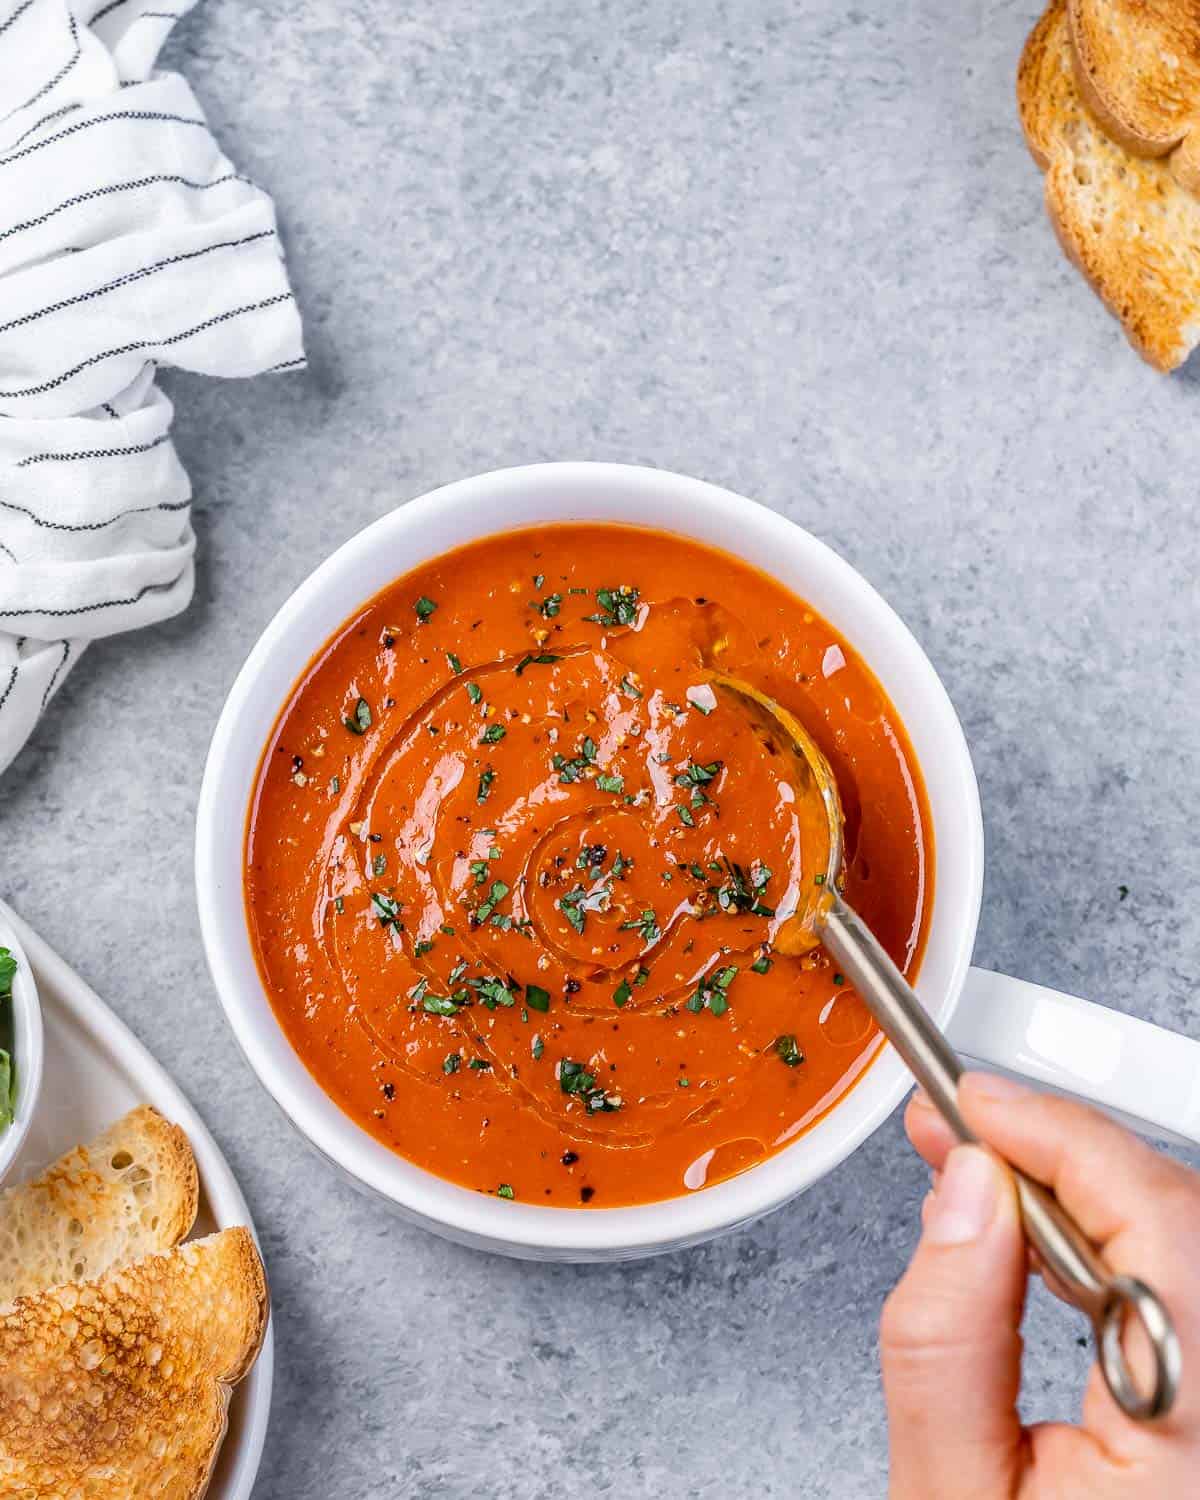 Stirring a spoon in a bowl of roasted red pepper soup.